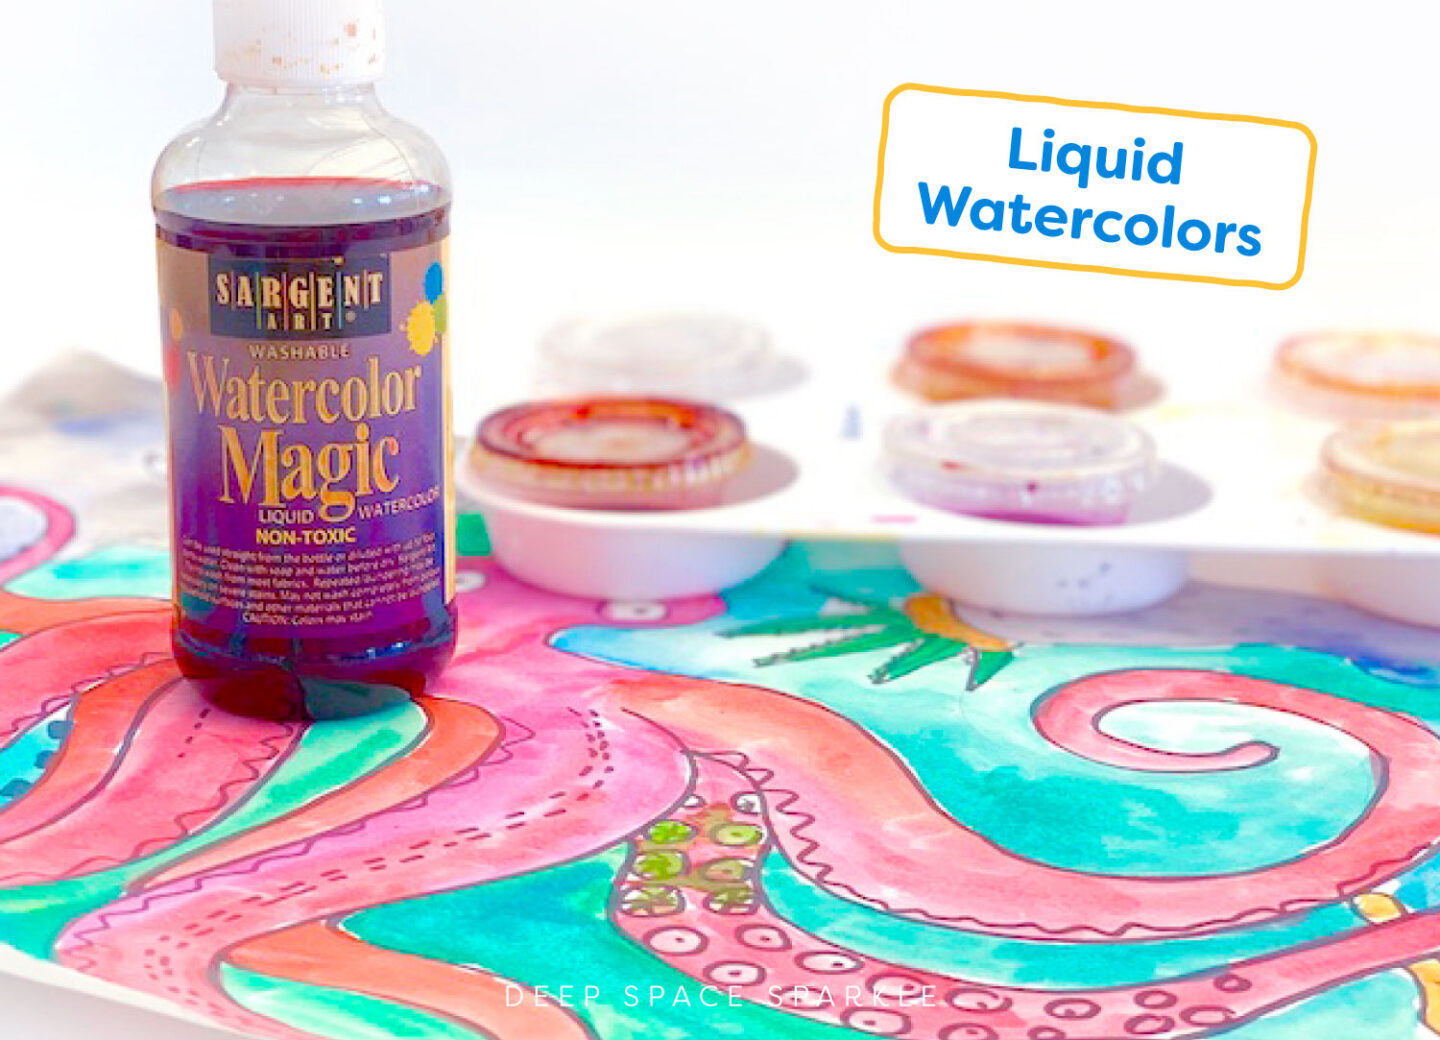 Liquid The Top 5 Watercolor, Colored Pencil and Crayon Sets for Kids